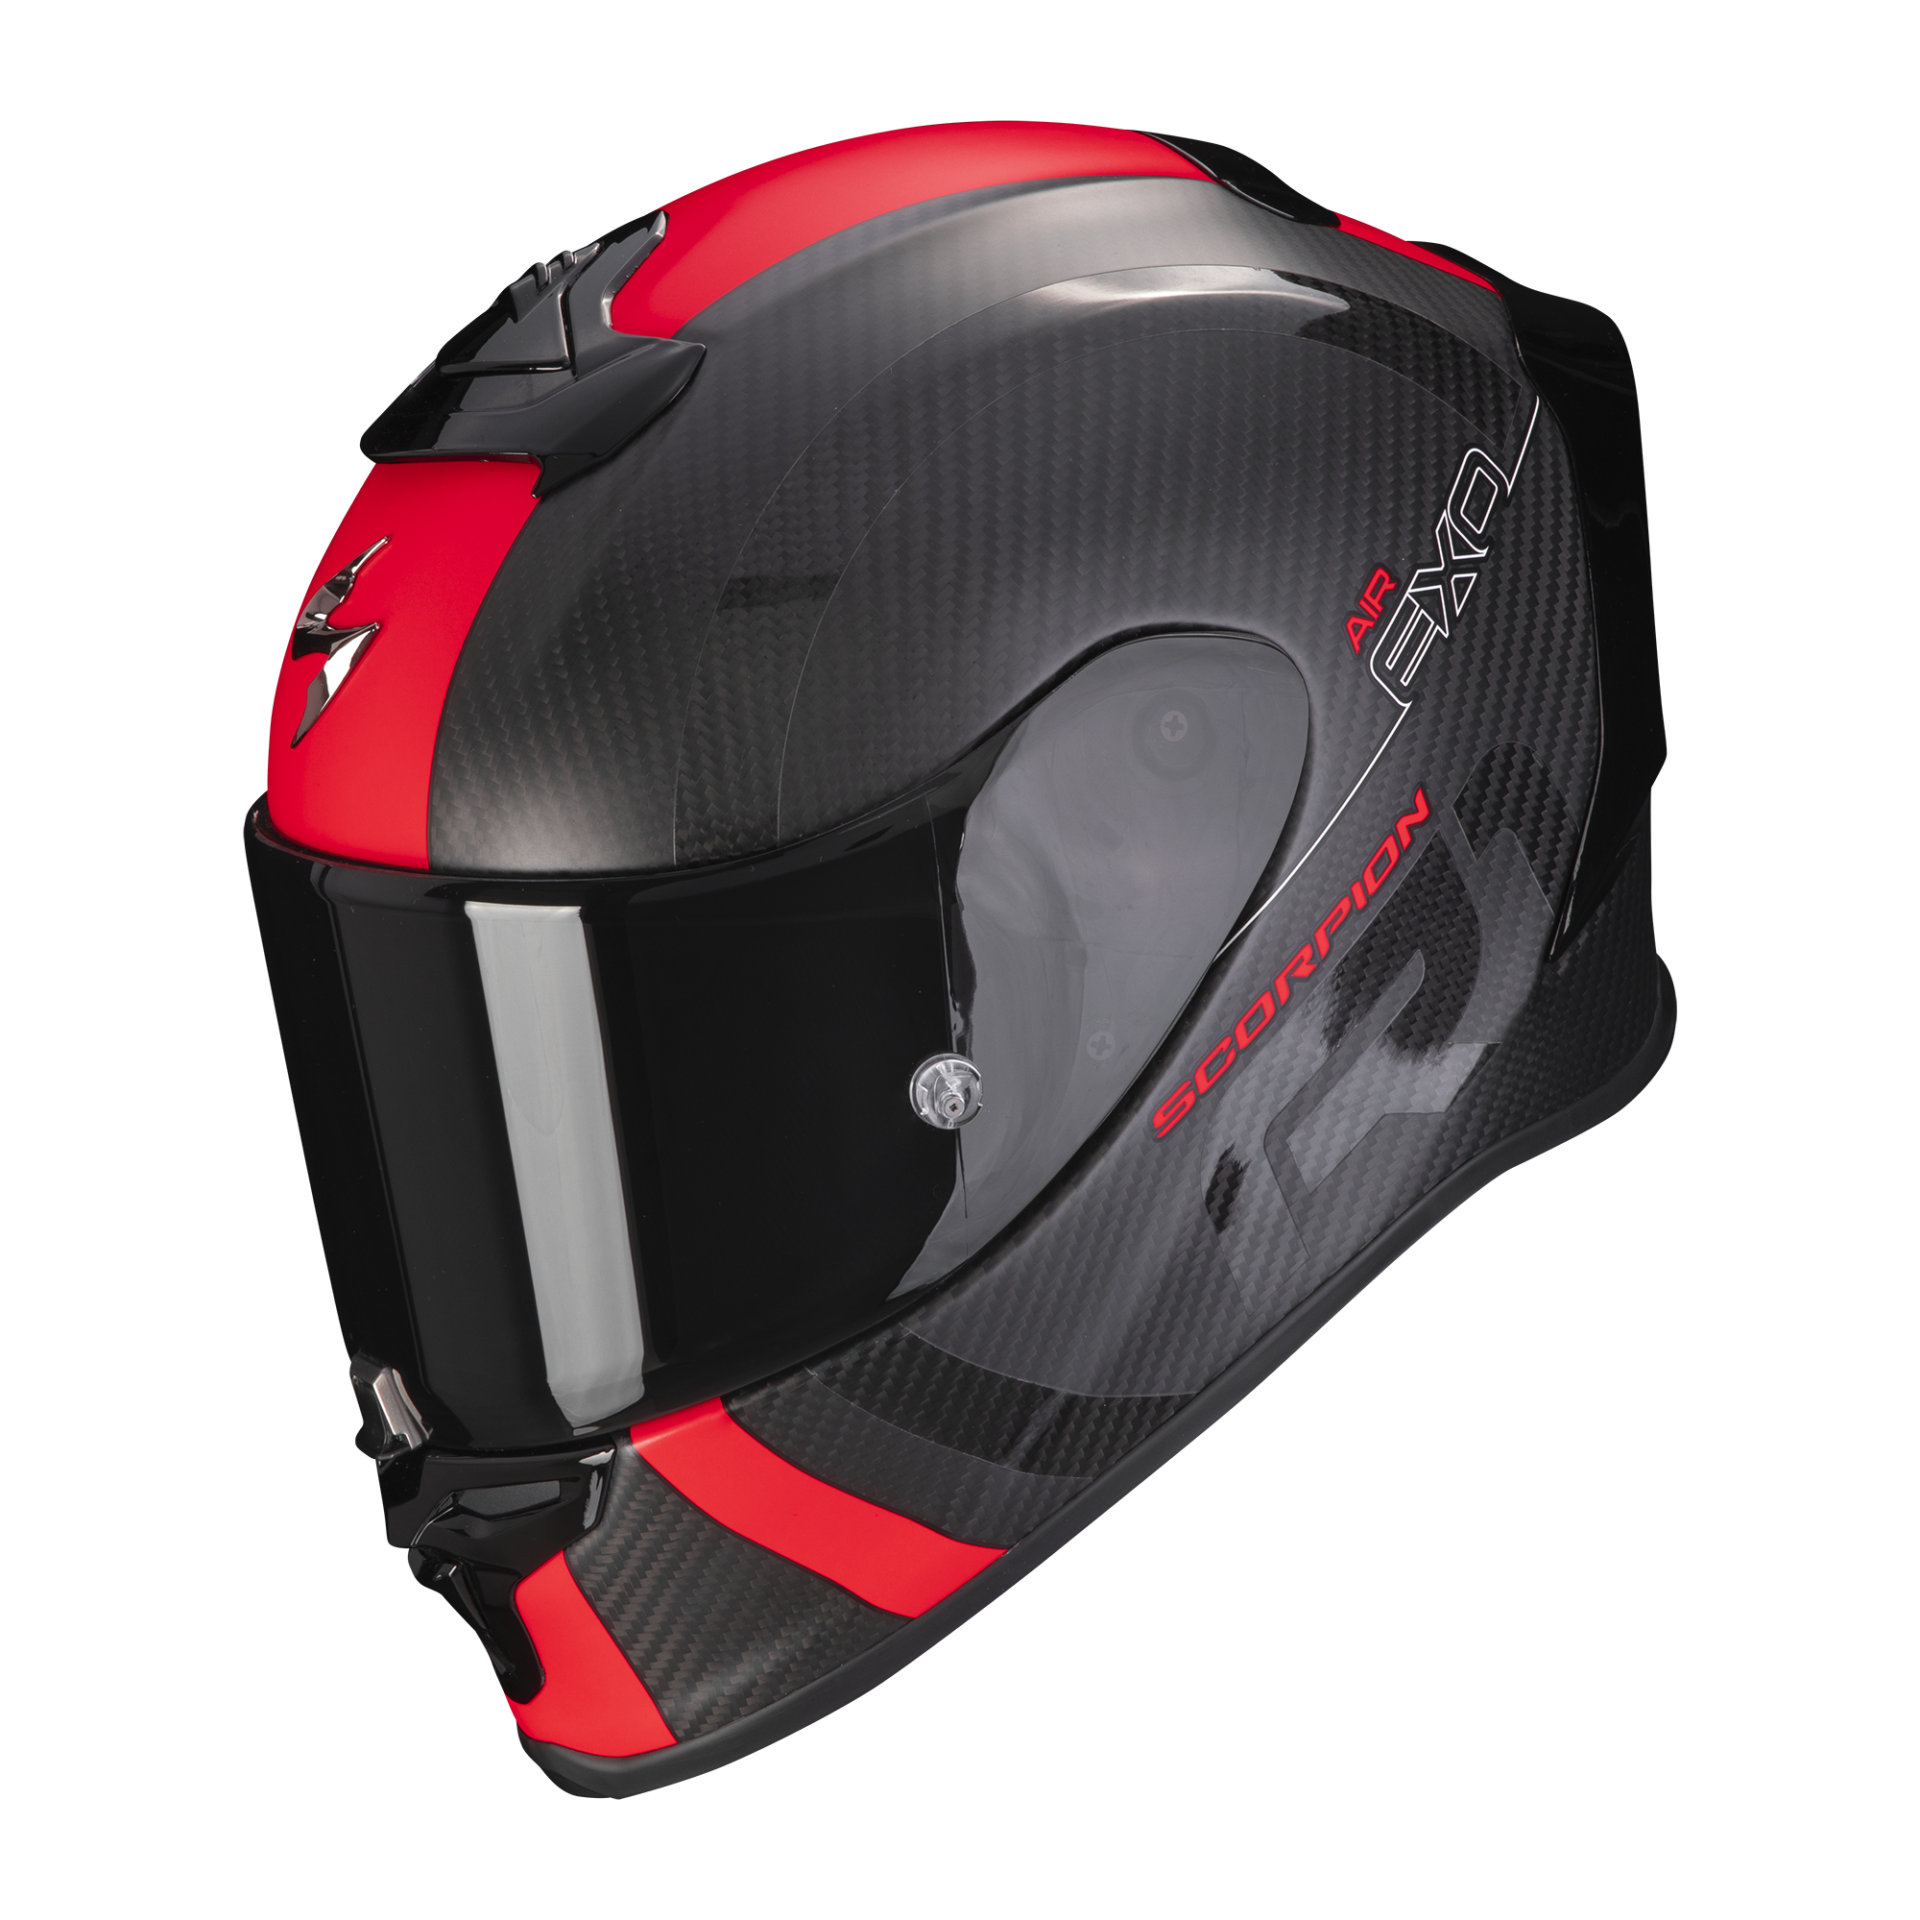 Image of EU Scorpion Exo-R1 Evo Carbon Air Mg Mat Black-Red Casque Intégral Taille 2XL